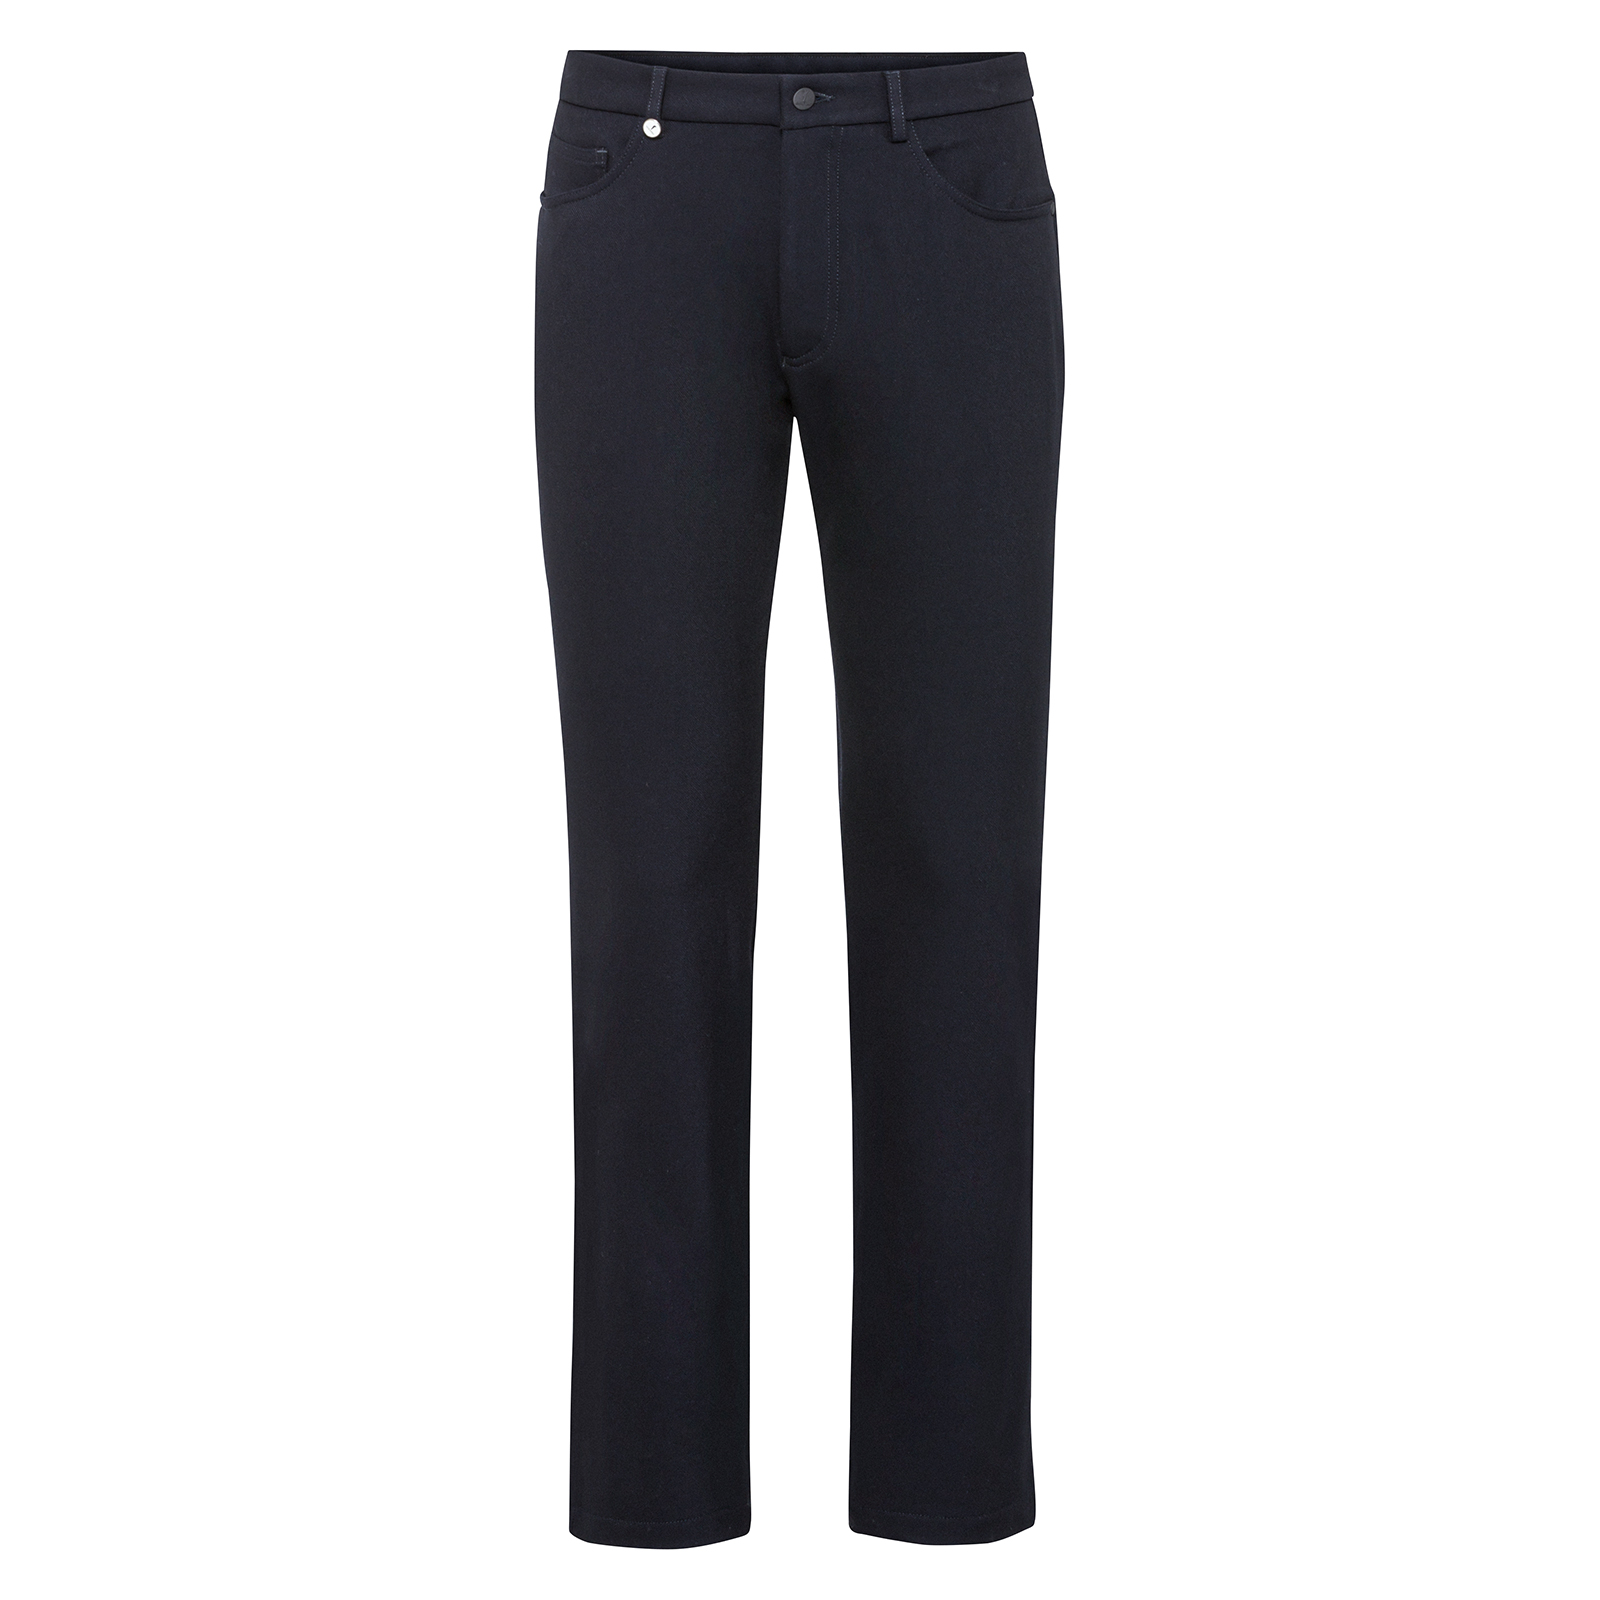 Fashionable men's golf trousers with stretch function